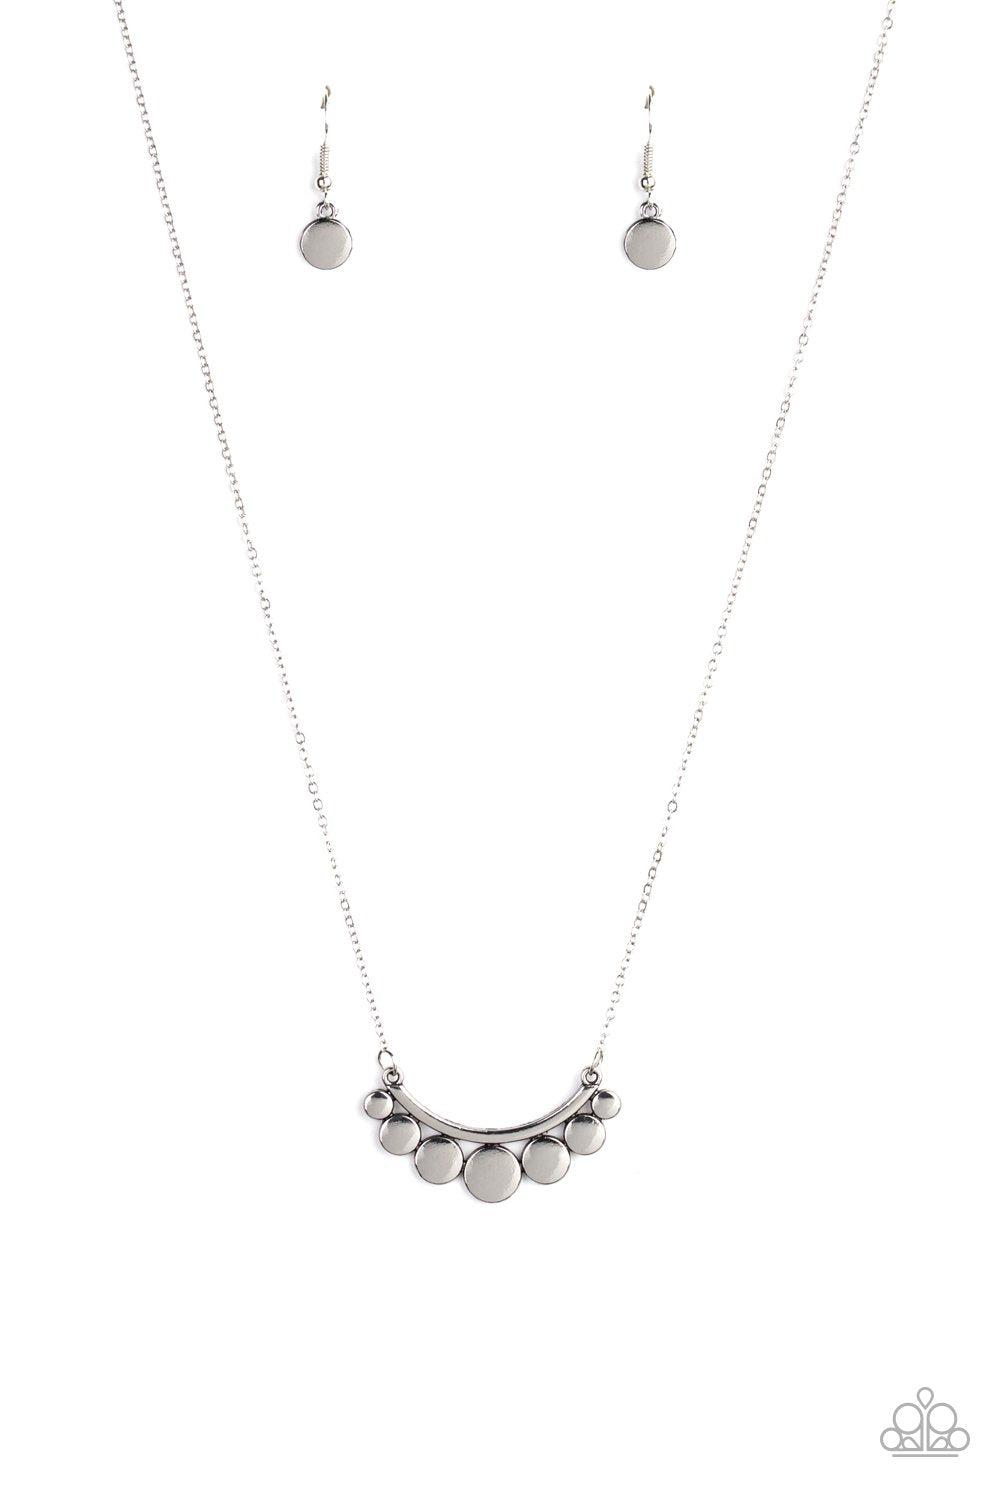 Melodic Metallics Silver Necklace - Paparazzi Accessories - lightbox -CarasShop.com - $5 Jewelry by Cara Jewels